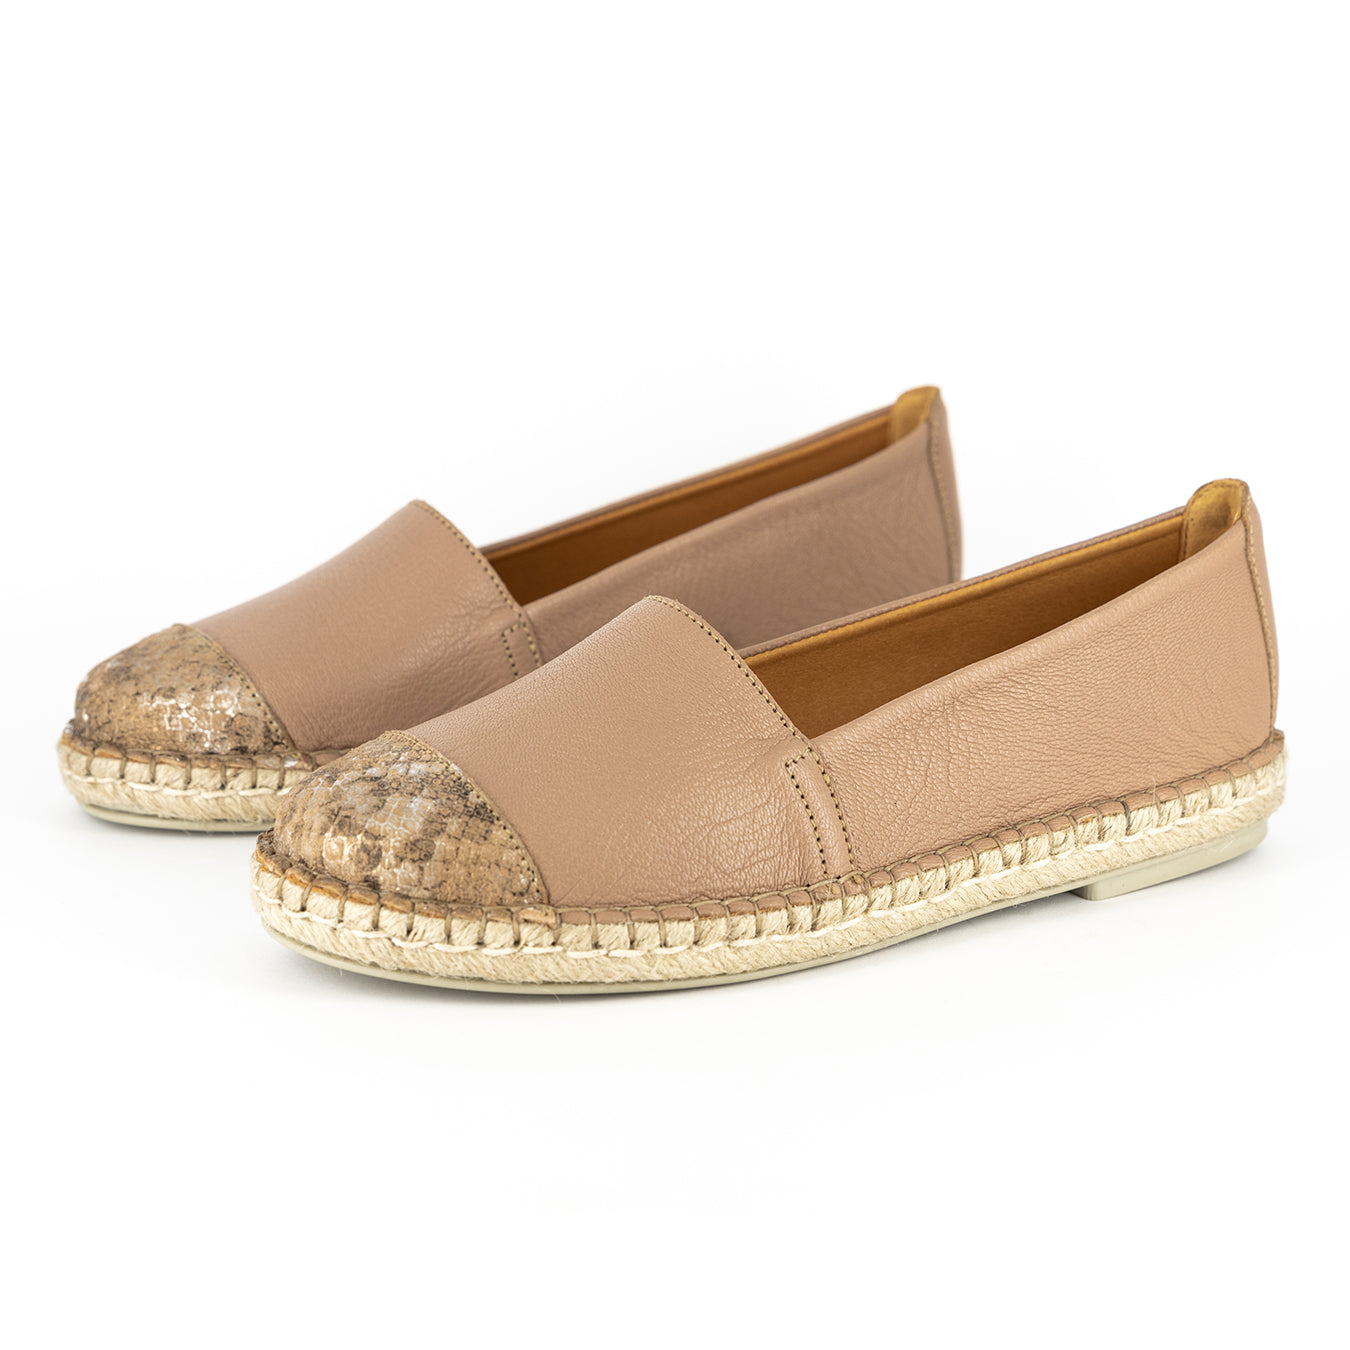 Consisela : Ladies Leather Espadrille Shoe in Timber Cayak & Noisette ...